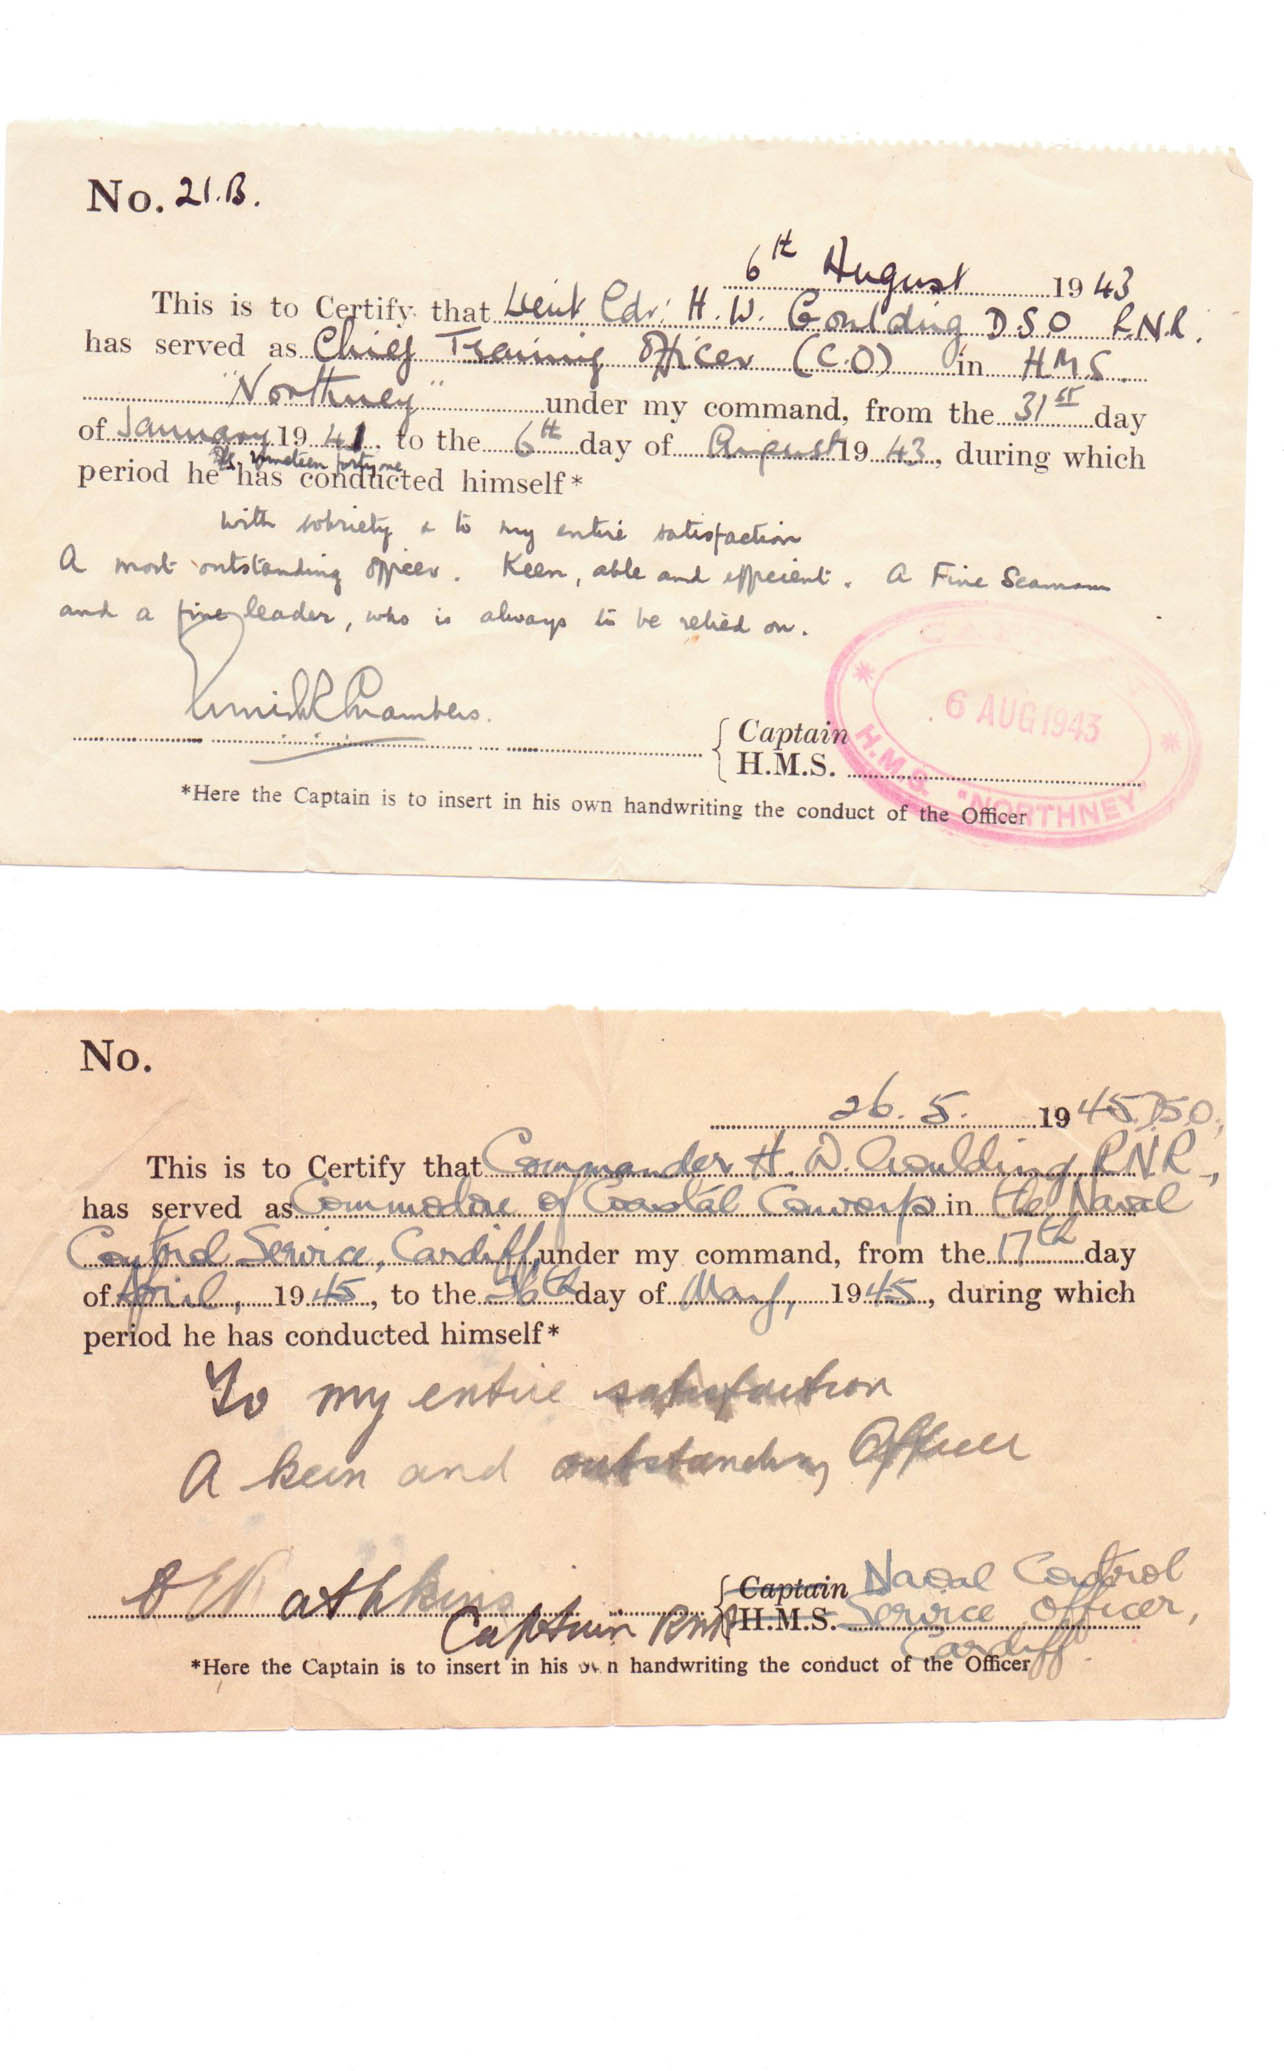 Service Documents for Cmdr. H. W. Goulding DSO RNR